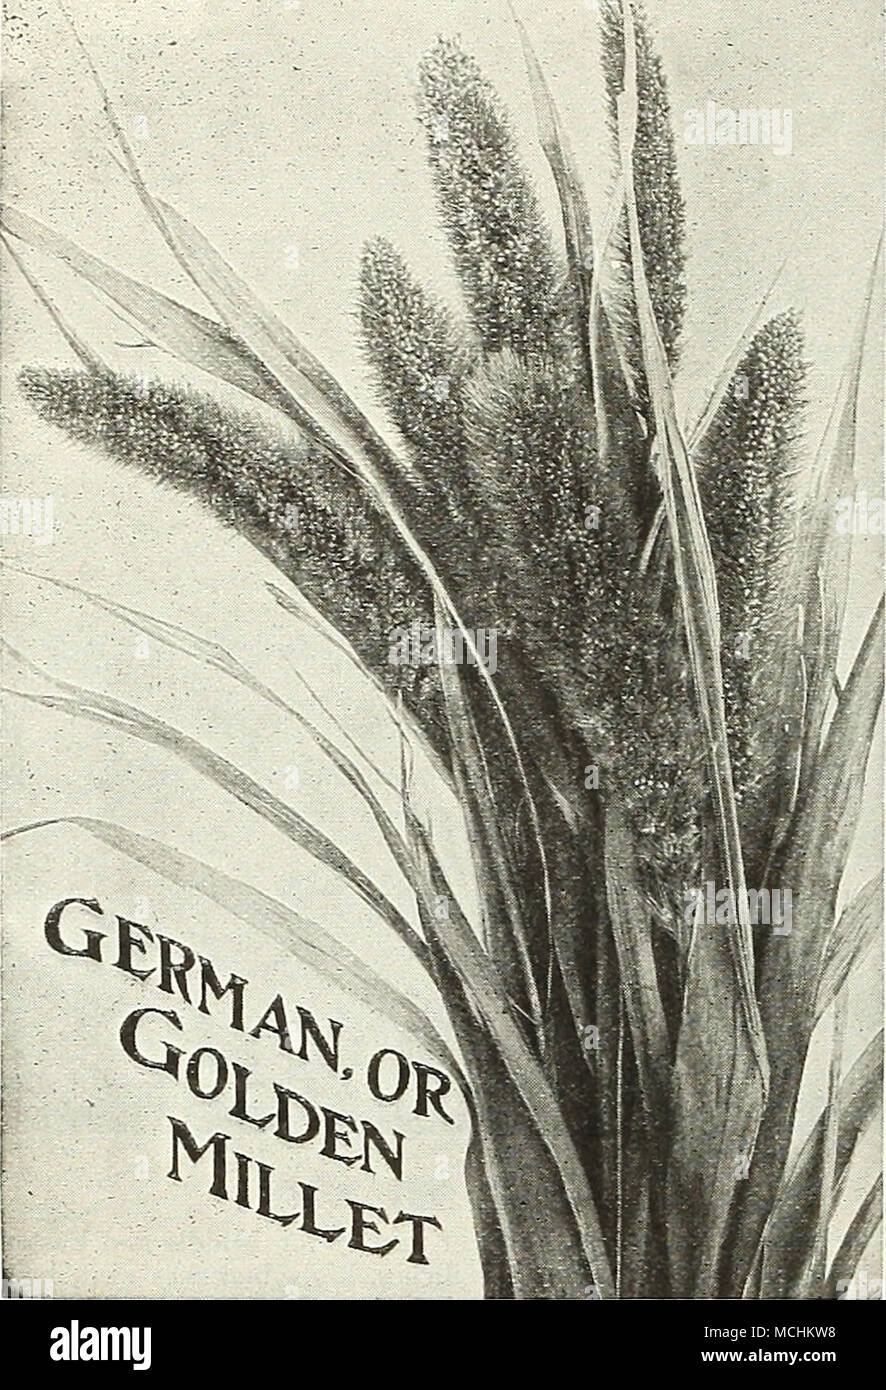 . ^&quot;&gt; German, or Golden Millet [Panicvm Oermanicum). (See cut.; A valuable annual hay and fodder crop. Sow 1 bushel to the acre. Bushel (50 lbs.), write for price. Hungarian Hillet [Panicum Hungariensis). An annual forage plant, early and productive, growing 2 to 3 feet high. Sow 1 bushel to the ac;e. Bushel (48 lbs.), write for price. Egyptian, or East India Pearl Millet (Penicillaria spicuta). Grows from 8 to ]0 feet high. For fodder, sow 5 pounds in drills 3 feet apart, thin out in rows to 1 foot apart. Lb., 40 cts., postpaid. By express or freight, at purchaser's expense, 5 lbs., $ Stock Photo